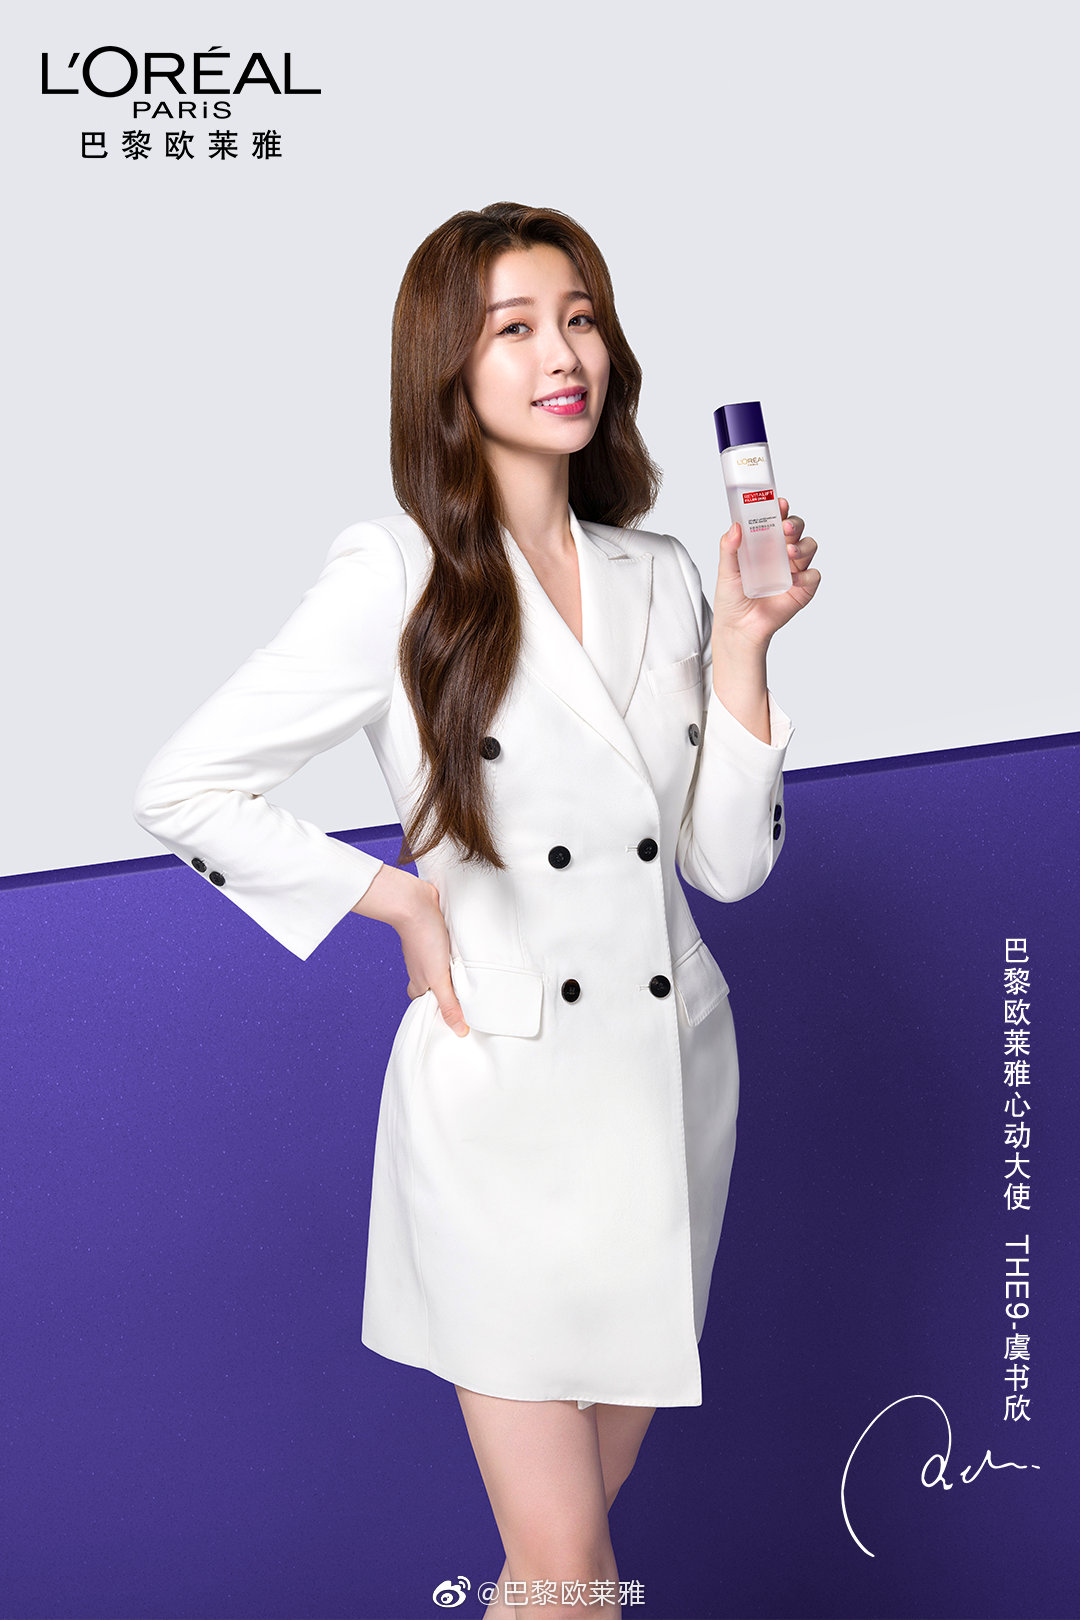 Dramapotatoe - c-drama news and more - Esther Yu announced as the first brand  ambassador for Versace fragrances in China #yushuxin